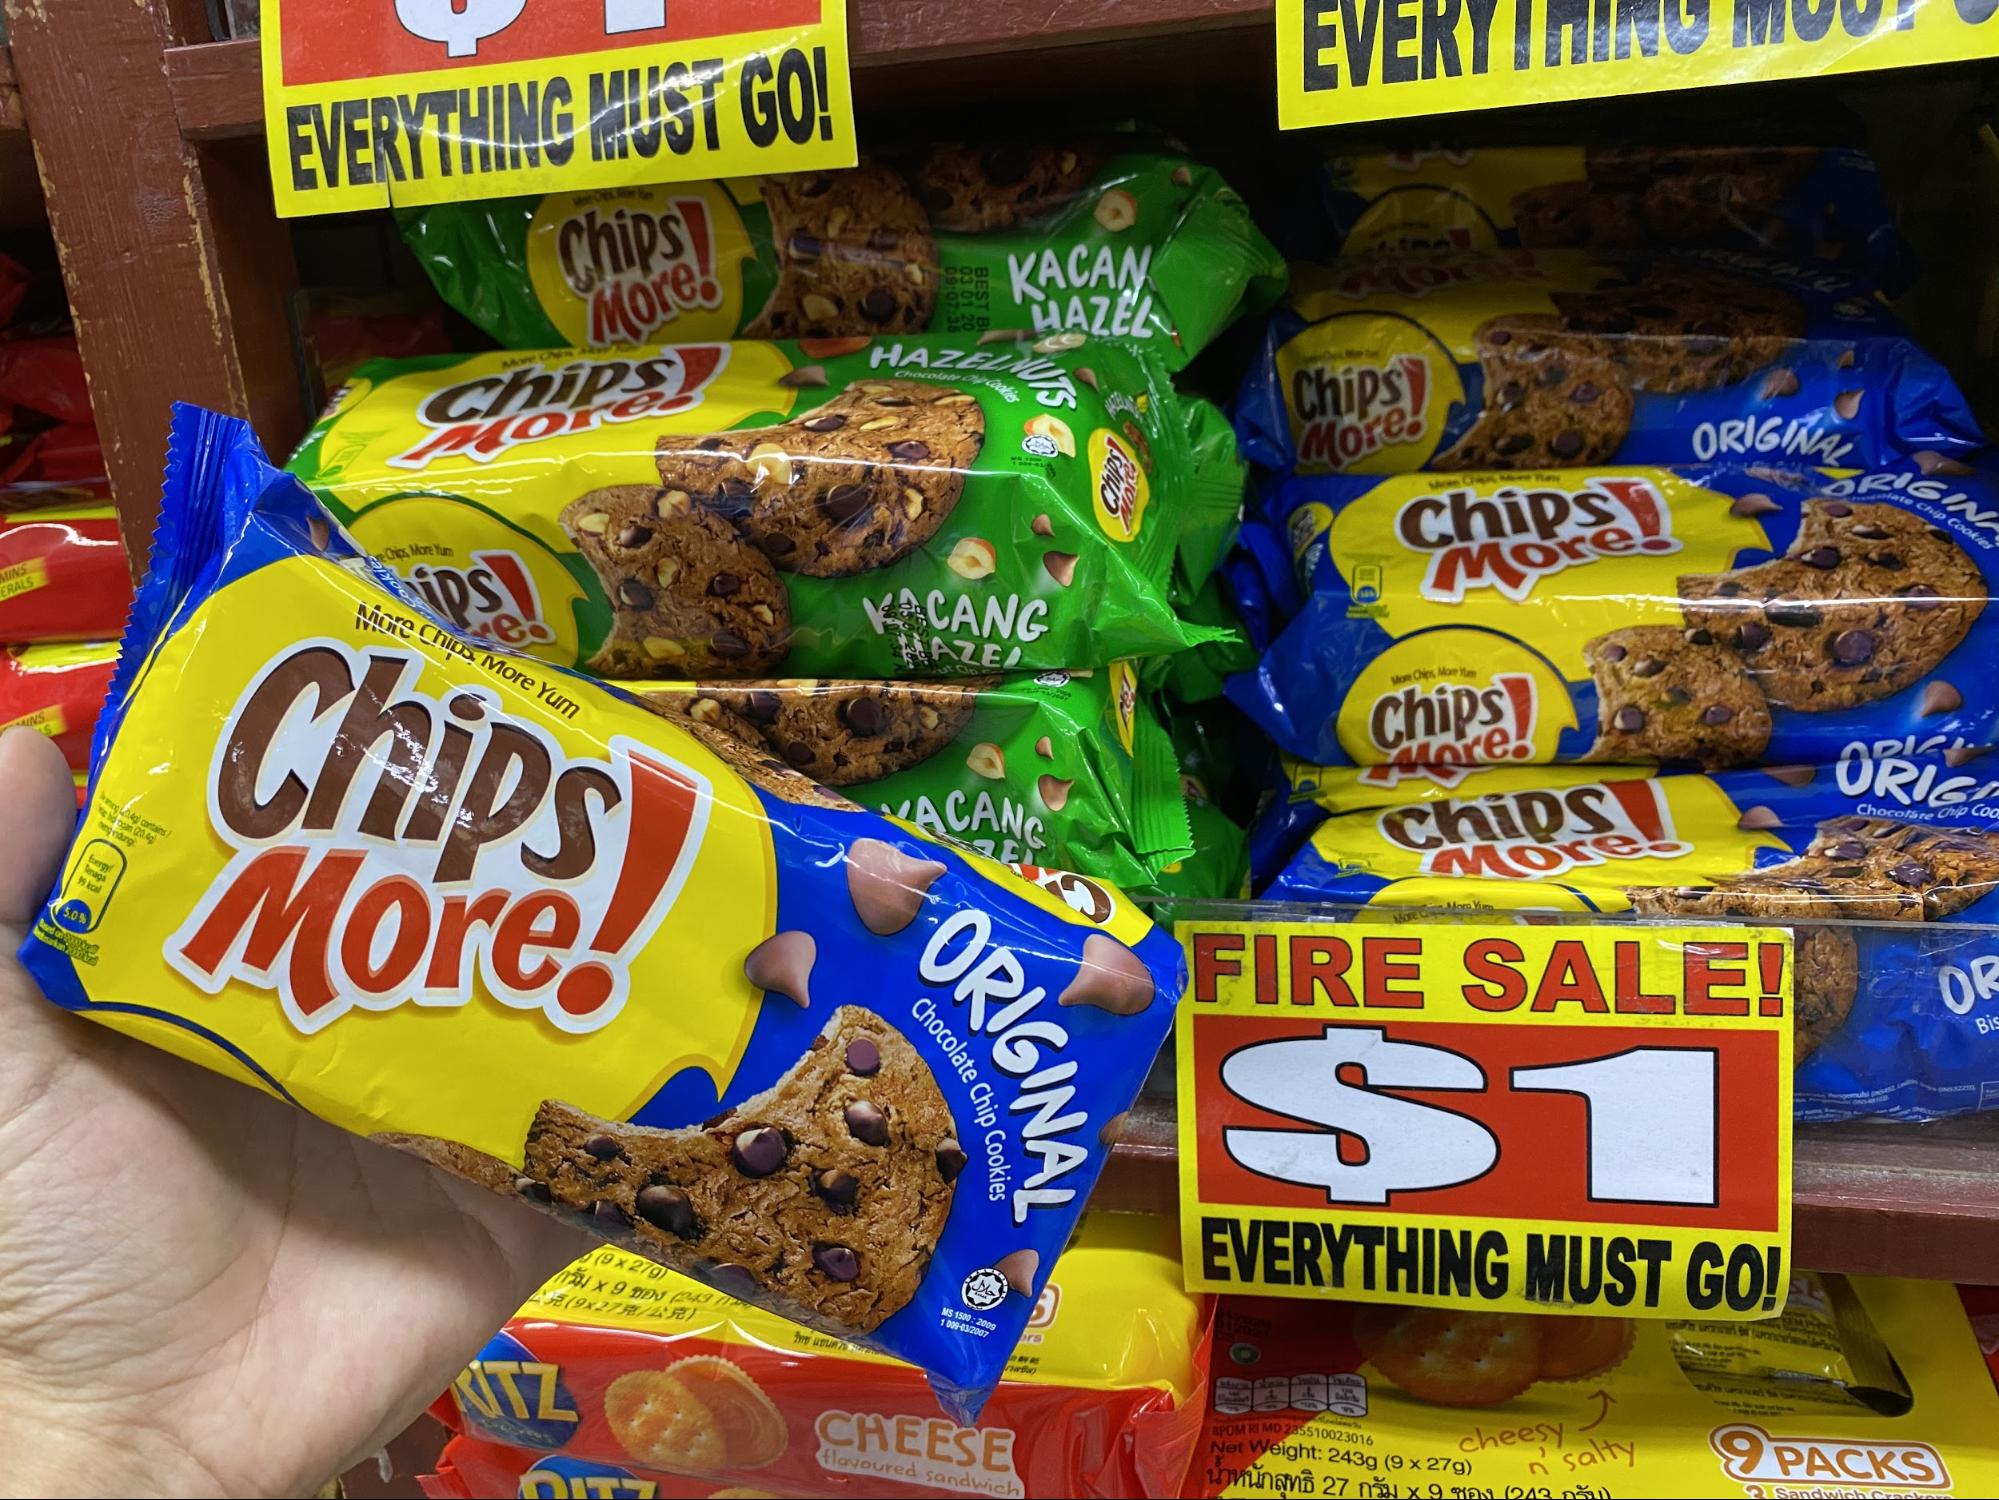 Chipsmore chocolate chip cookies at the value dollar store in Singapore